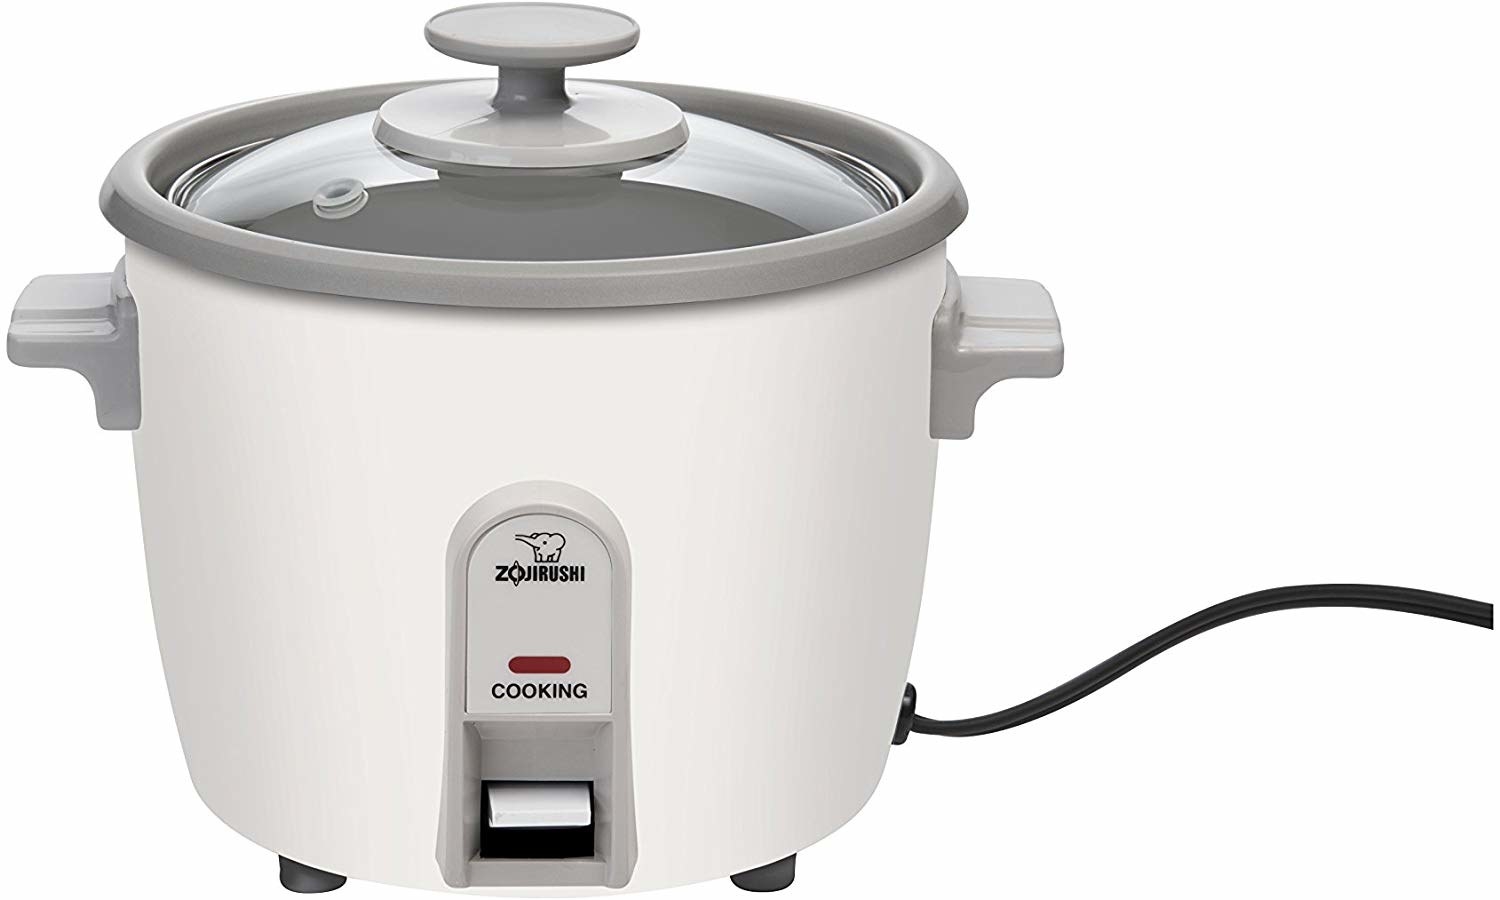 Five must-have appliances to cook your way through isolation